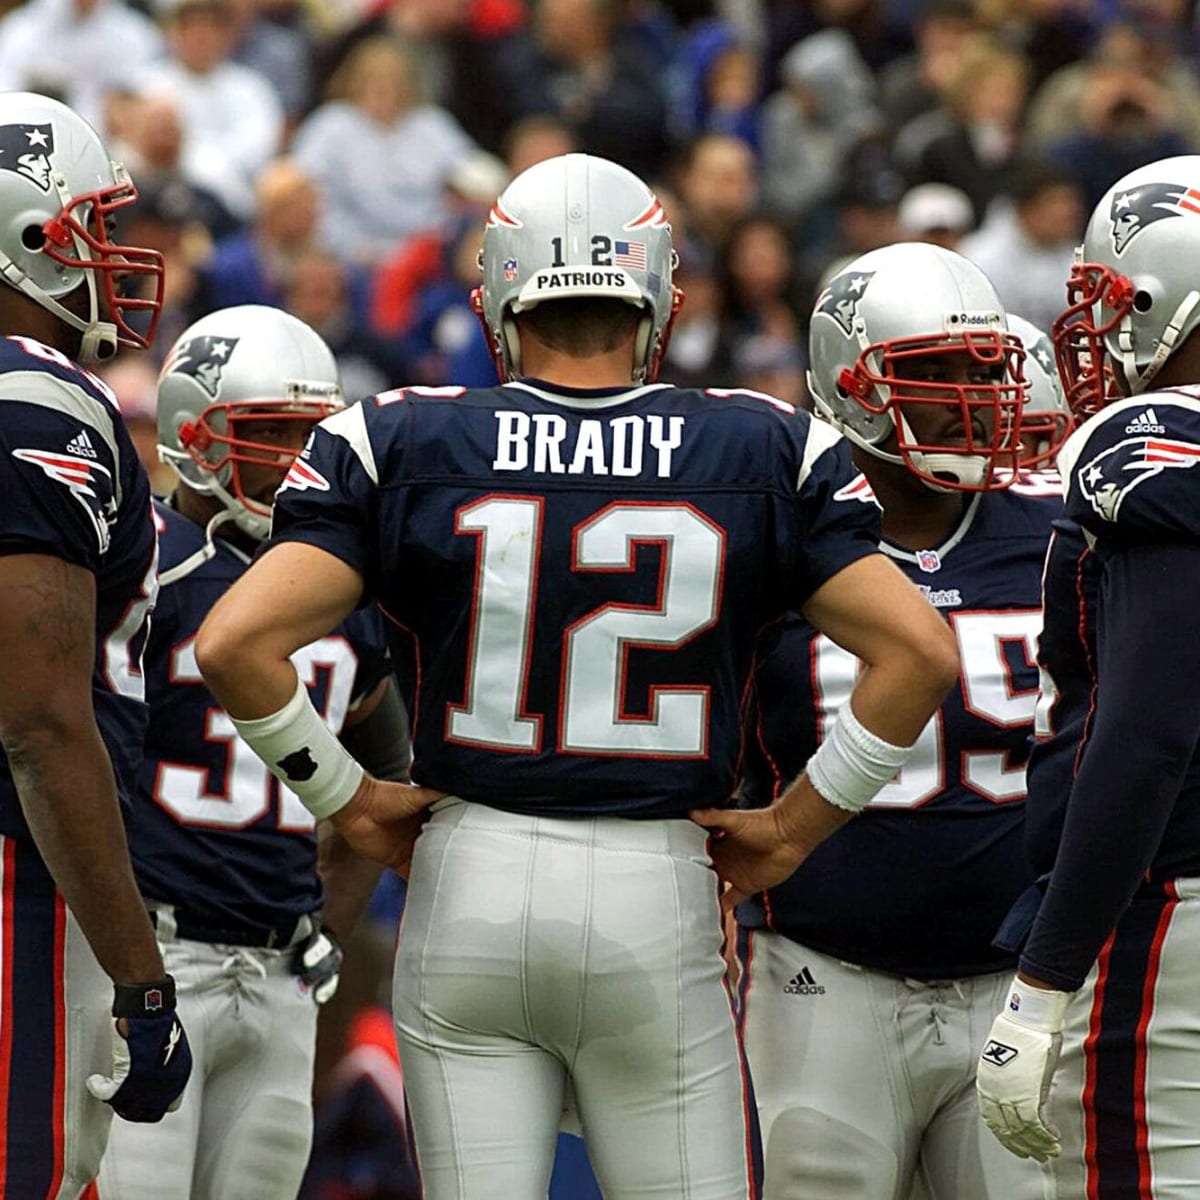 Quiz: Can You Guess What Happens in '80 for Brady'?